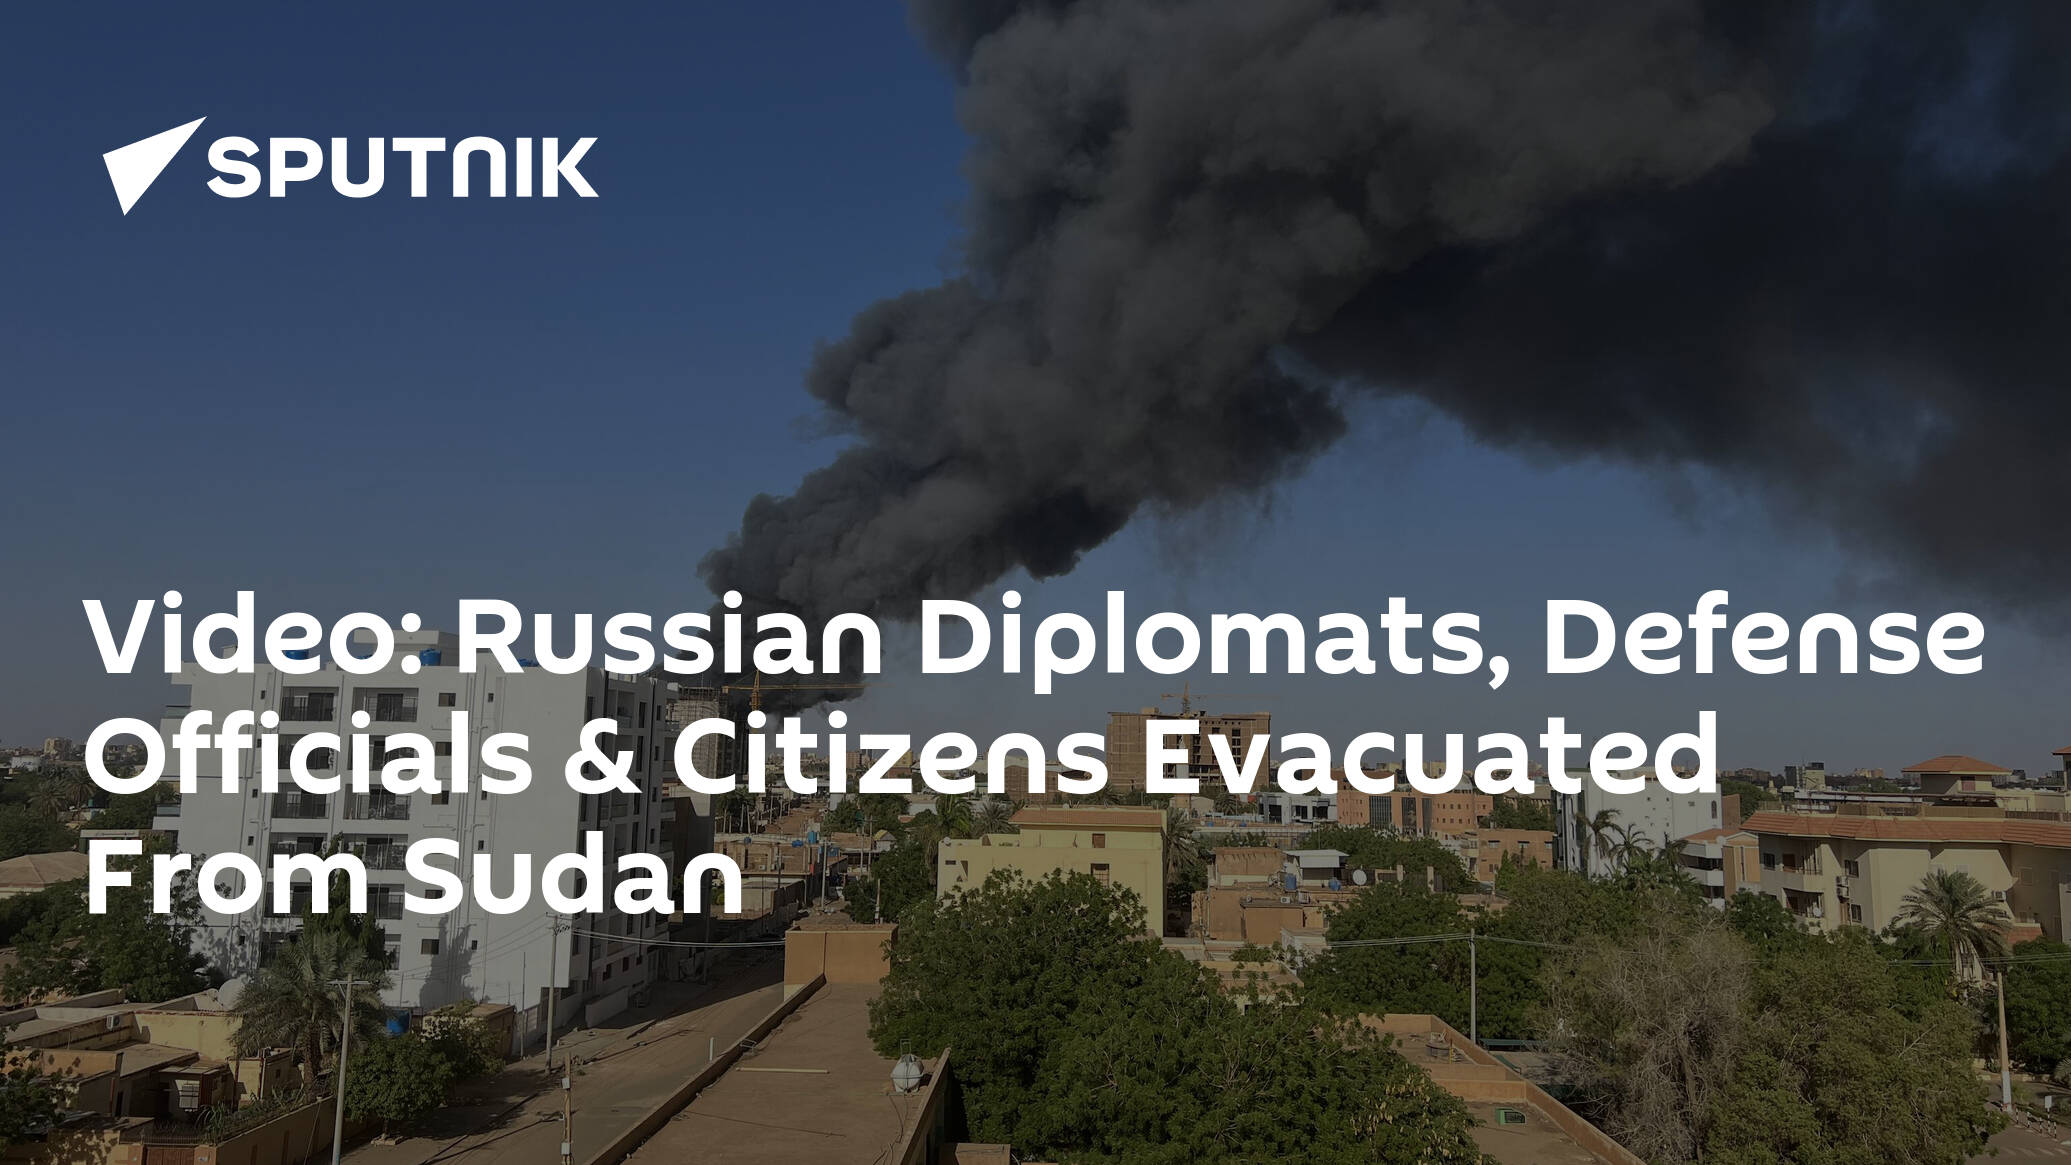 Video: Russian Diplomats, Defense Officials & Citizens Evacuated From Sudan